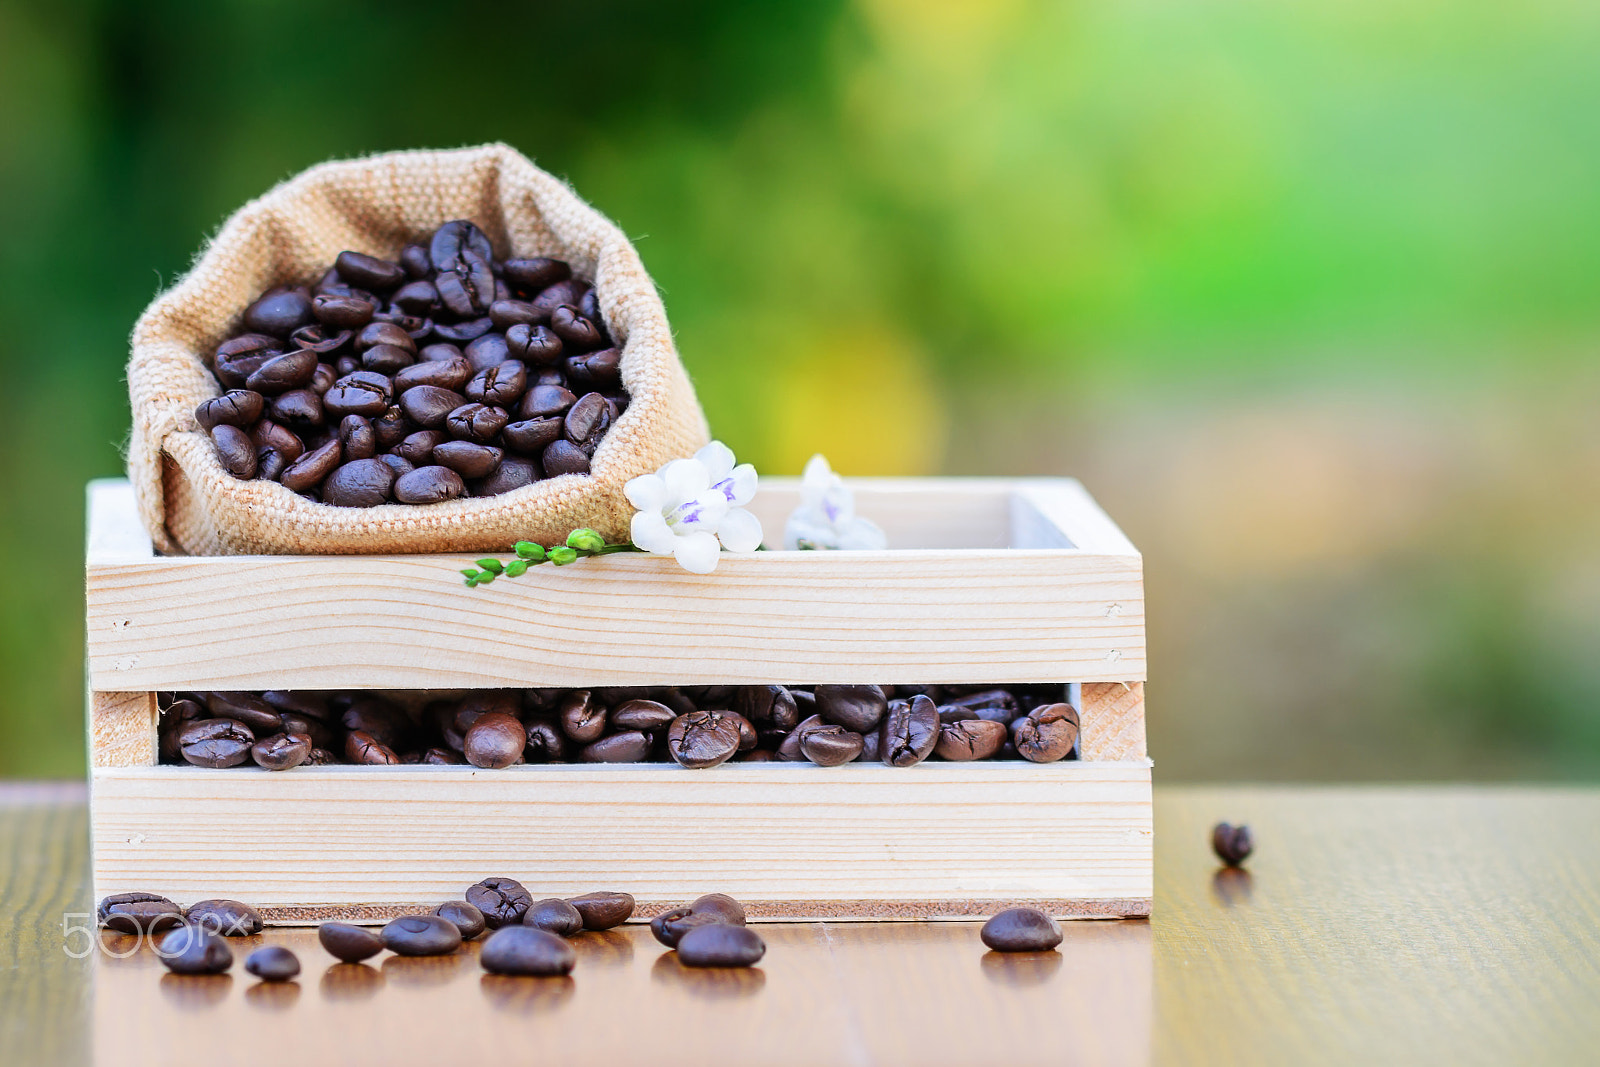 Nikon D5200 + Tamron SP 90mm F2.8 Di VC USD 1:1 Macro (F004) sample photo. Coffee in wooden box with green blurred background photography